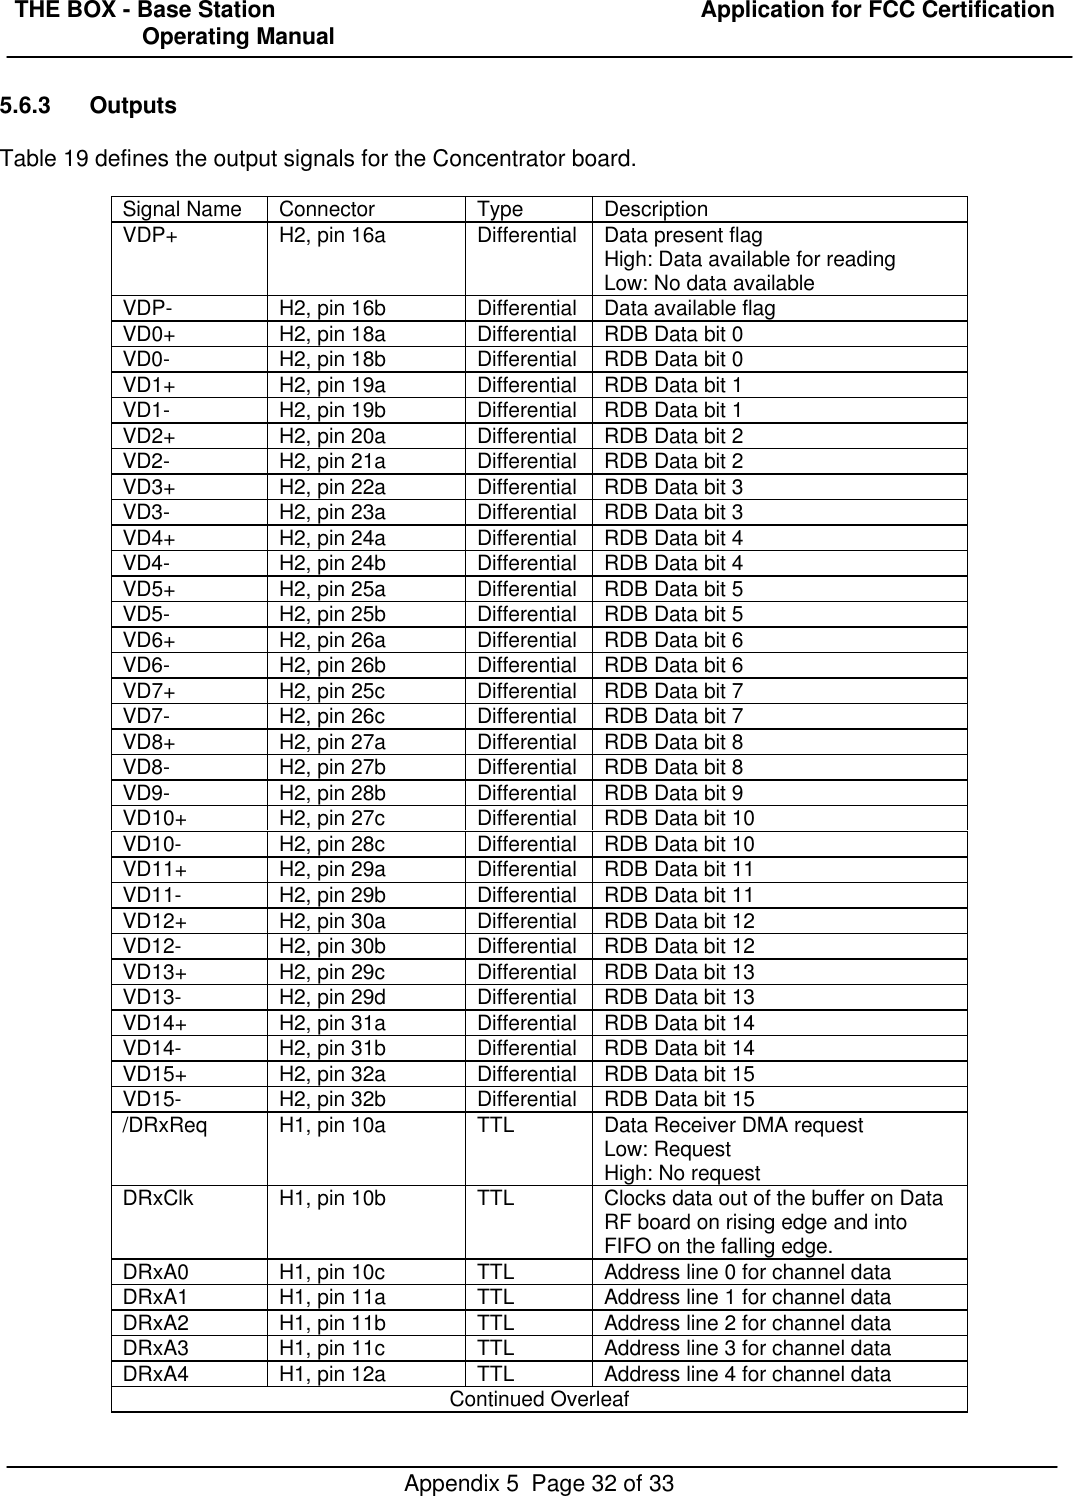 THE BOX - Base Station  Application for FCC Certification                    Operating ManualAppendix 5  Page 32 of 335.6.3 OutputsTable 19 defines the output signals for the Concentrator board.Signal Name Connector Type DescriptionVDP+ H2, pin 16a Differential Data present flagHigh: Data available for readingLow: No data availableVDP- H2, pin 16b Differential Data available flagVD0+ H2, pin 18a Differential RDB Data bit 0VD0- H2, pin 18b Differential RDB Data bit 0VD1+ H2, pin 19a Differential RDB Data bit 1VD1- H2, pin 19b Differential RDB Data bit 1VD2+ H2, pin 20a Differential RDB Data bit 2VD2- H2, pin 21a Differential RDB Data bit 2VD3+ H2, pin 22a Differential RDB Data bit 3VD3- H2, pin 23a Differential RDB Data bit 3VD4+ H2, pin 24a Differential RDB Data bit 4VD4- H2, pin 24b Differential RDB Data bit 4VD5+ H2, pin 25a Differential RDB Data bit 5VD5- H2, pin 25b Differential RDB Data bit 5VD6+ H2, pin 26a Differential RDB Data bit 6VD6- H2, pin 26b Differential RDB Data bit 6VD7+ H2, pin 25c Differential RDB Data bit 7VD7- H2, pin 26c Differential RDB Data bit 7VD8+ H2, pin 27a Differential RDB Data bit 8VD8- H2, pin 27b Differential RDB Data bit 8VD9- H2, pin 28b Differential RDB Data bit 9VD10+ H2, pin 27c Differential RDB Data bit 10VD10- H2, pin 28c Differential RDB Data bit 10VD11+ H2, pin 29a Differential RDB Data bit 11VD11- H2, pin 29b Differential RDB Data bit 11VD12+ H2, pin 30a Differential RDB Data bit 12VD12- H2, pin 30b Differential RDB Data bit 12VD13+ H2, pin 29c Differential RDB Data bit 13VD13- H2, pin 29d Differential RDB Data bit 13VD14+ H2, pin 31a Differential RDB Data bit 14VD14- H2, pin 31b Differential RDB Data bit 14VD15+ H2, pin 32a Differential RDB Data bit 15VD15- H2, pin 32b Differential RDB Data bit 15/DRxReq H1, pin 10a TTL Data Receiver DMA requestLow: RequestHigh: No requestDRxClk H1, pin 10b TTL Clocks data out of the buffer on DataRF board on rising edge and intoFIFO on the falling edge.DRxA0 H1, pin 10c TTL Address line 0 for channel dataDRxA1 H1, pin 11a TTL Address line 1 for channel dataDRxA2 H1, pin 11b TTL Address line 2 for channel dataDRxA3 H1, pin 11c TTL Address line 3 for channel dataDRxA4 H1, pin 12a TTL Address line 4 for channel dataContinued Overleaf